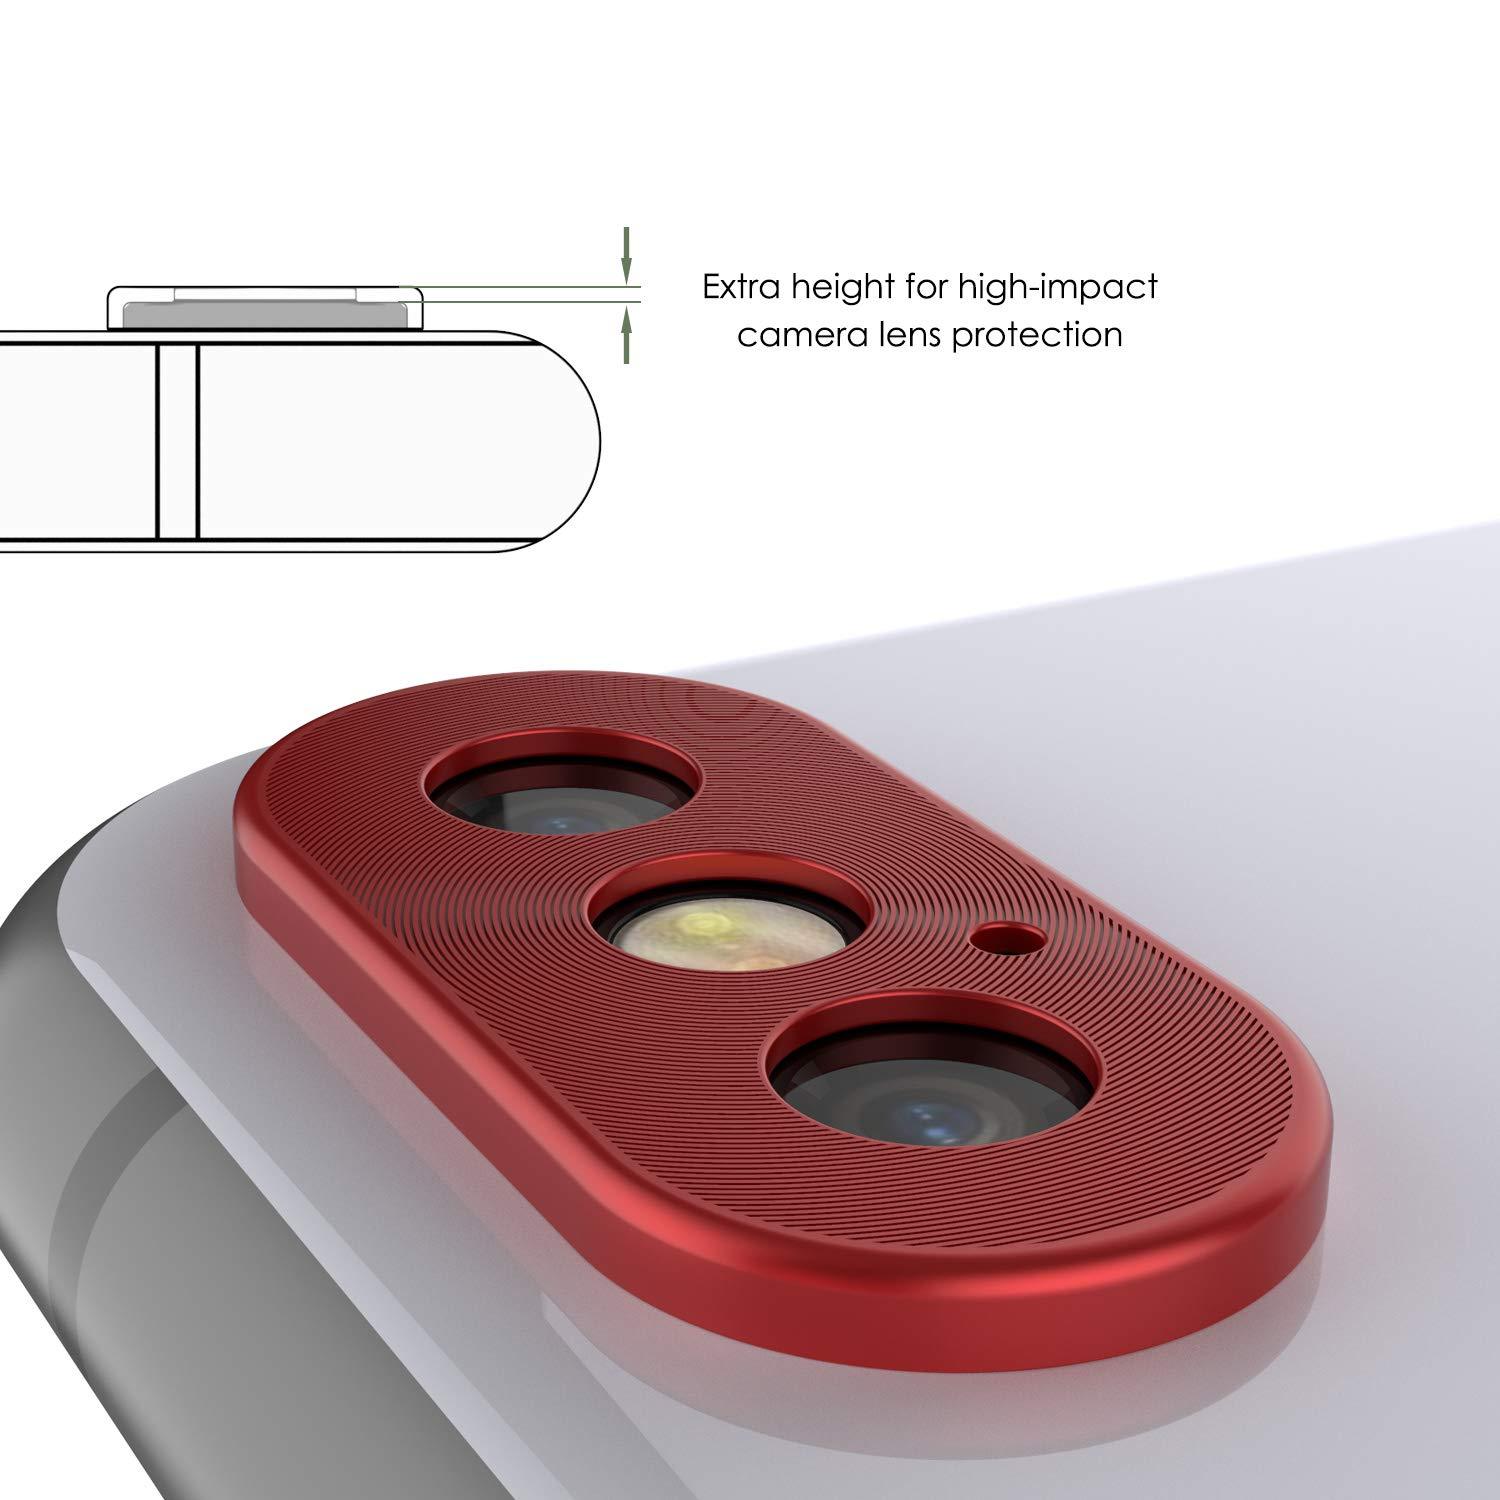 Punkcase iPhone XS Camera Protector Ring [Red]